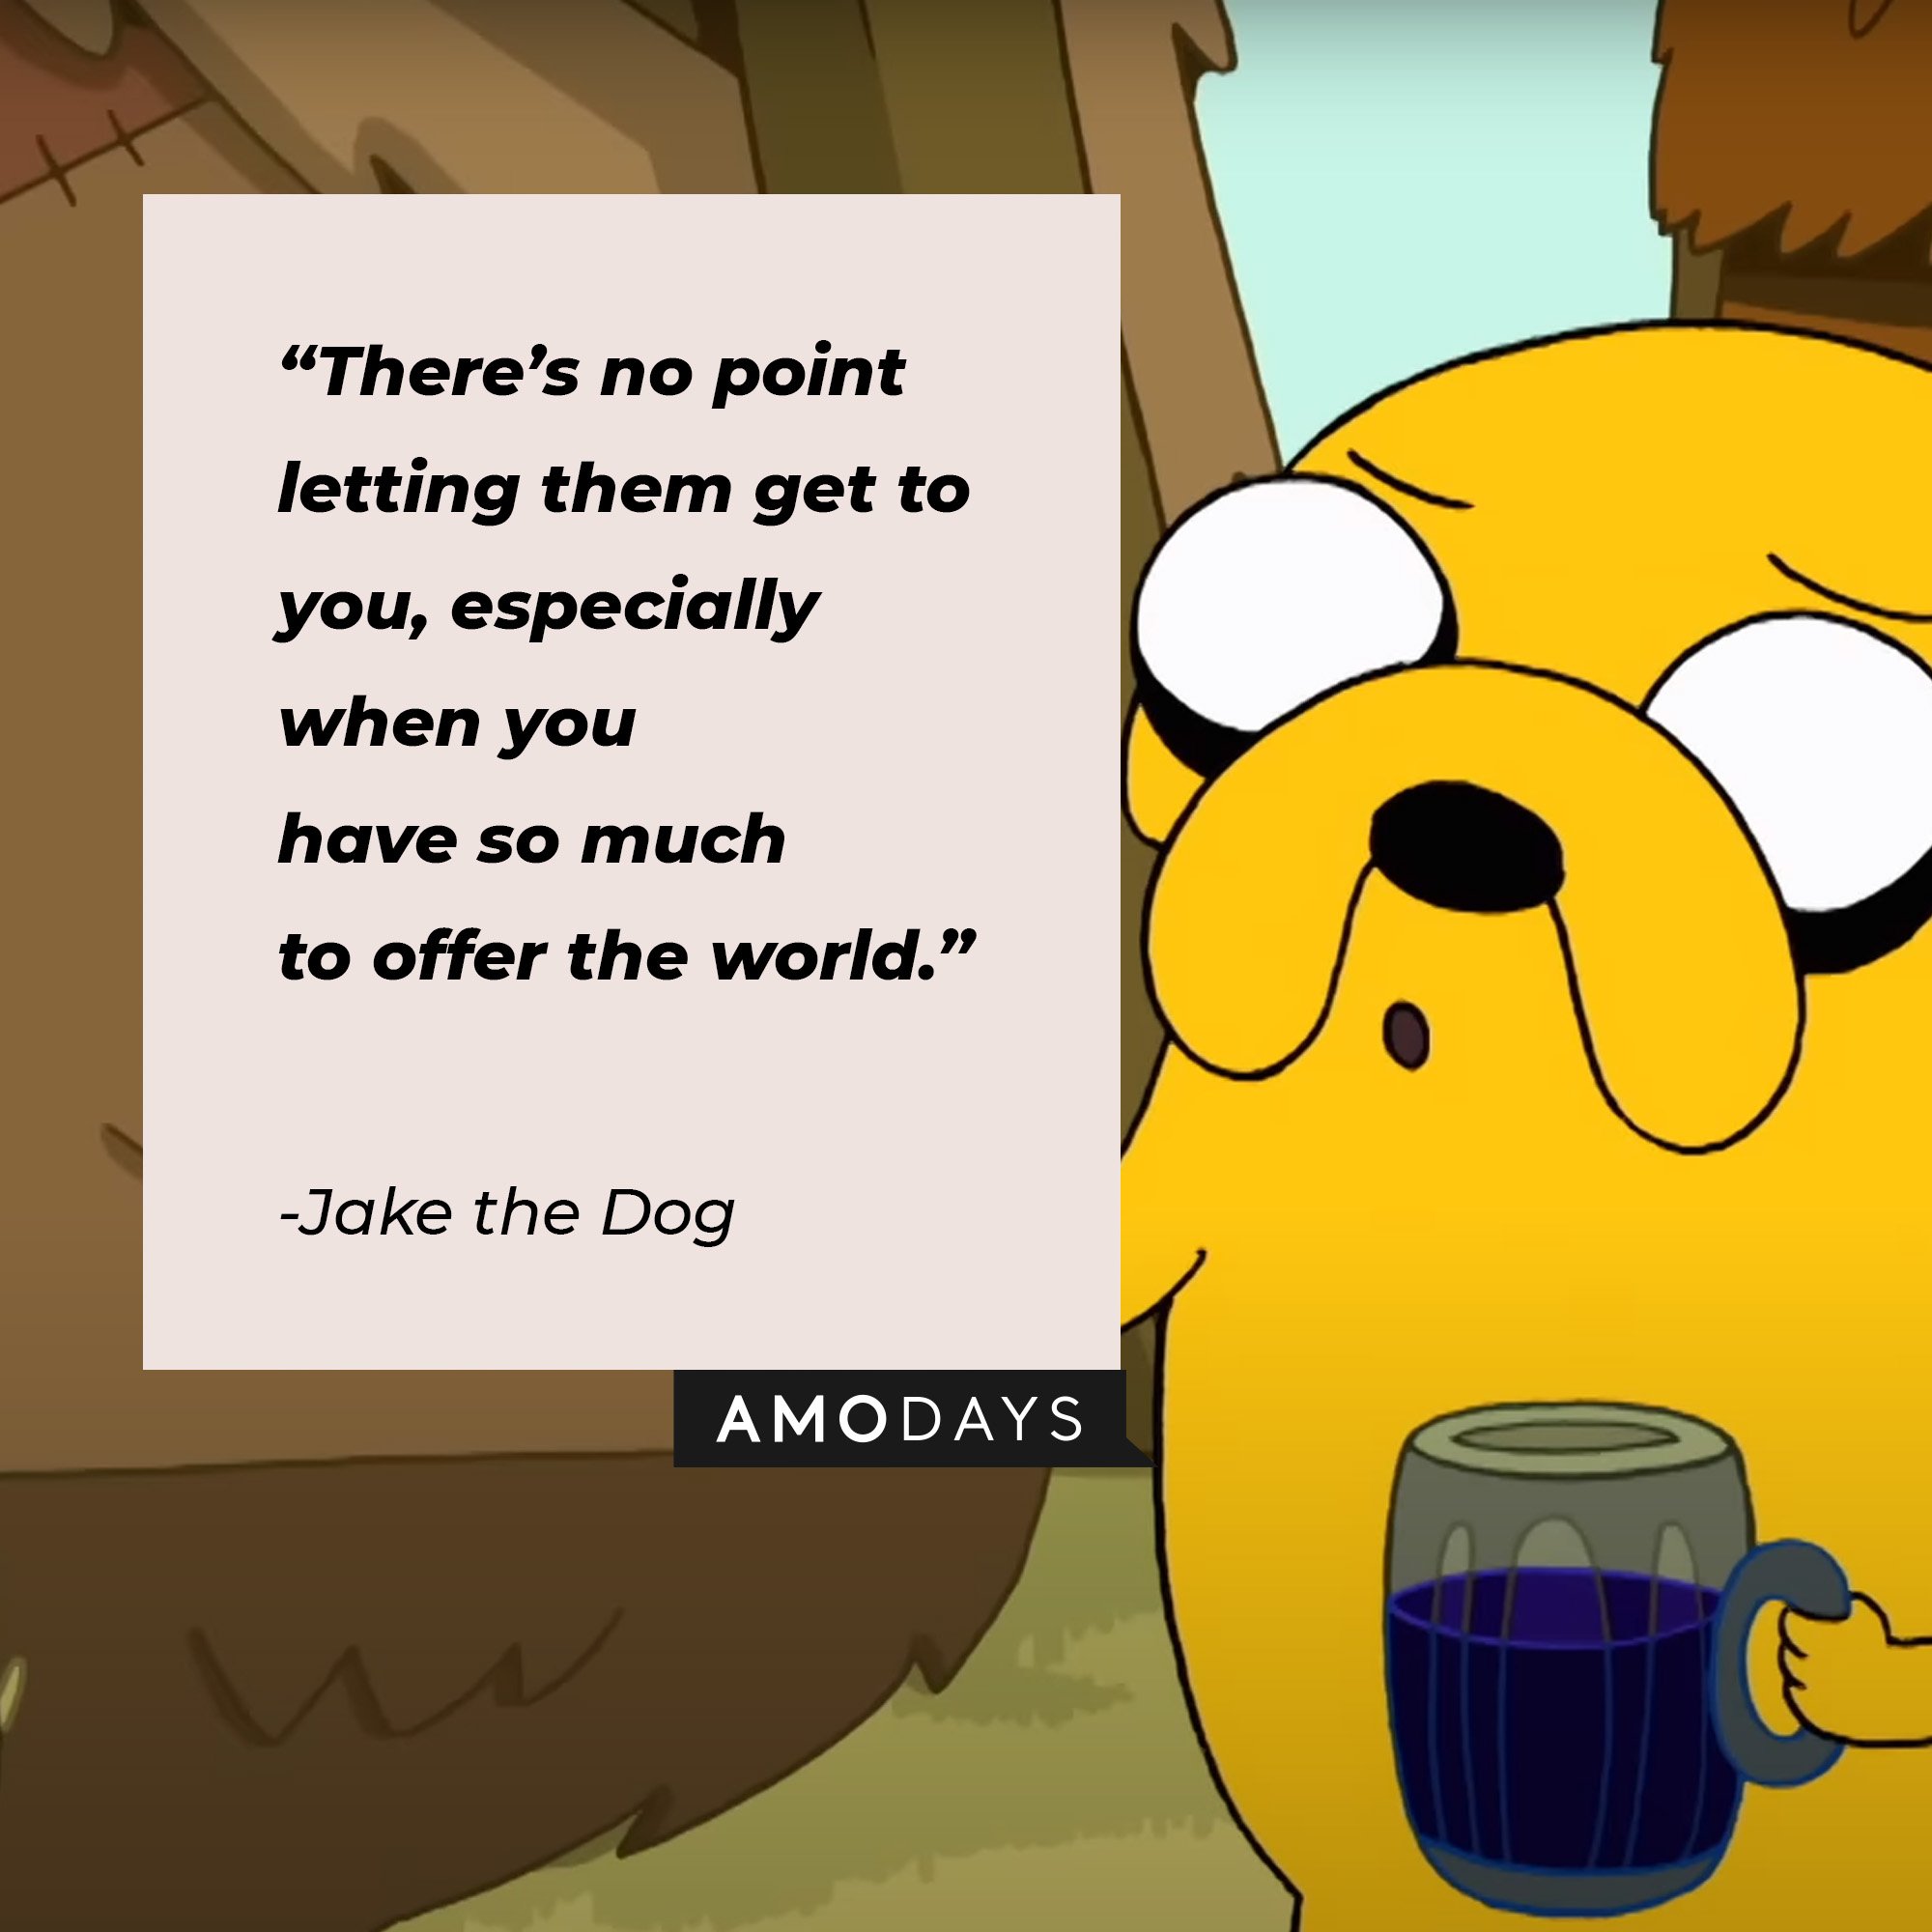  Jake the Dog’s quote: "There’s no point letting them get to you, especially when you have so much to offer the world.”| Image: AmoDays